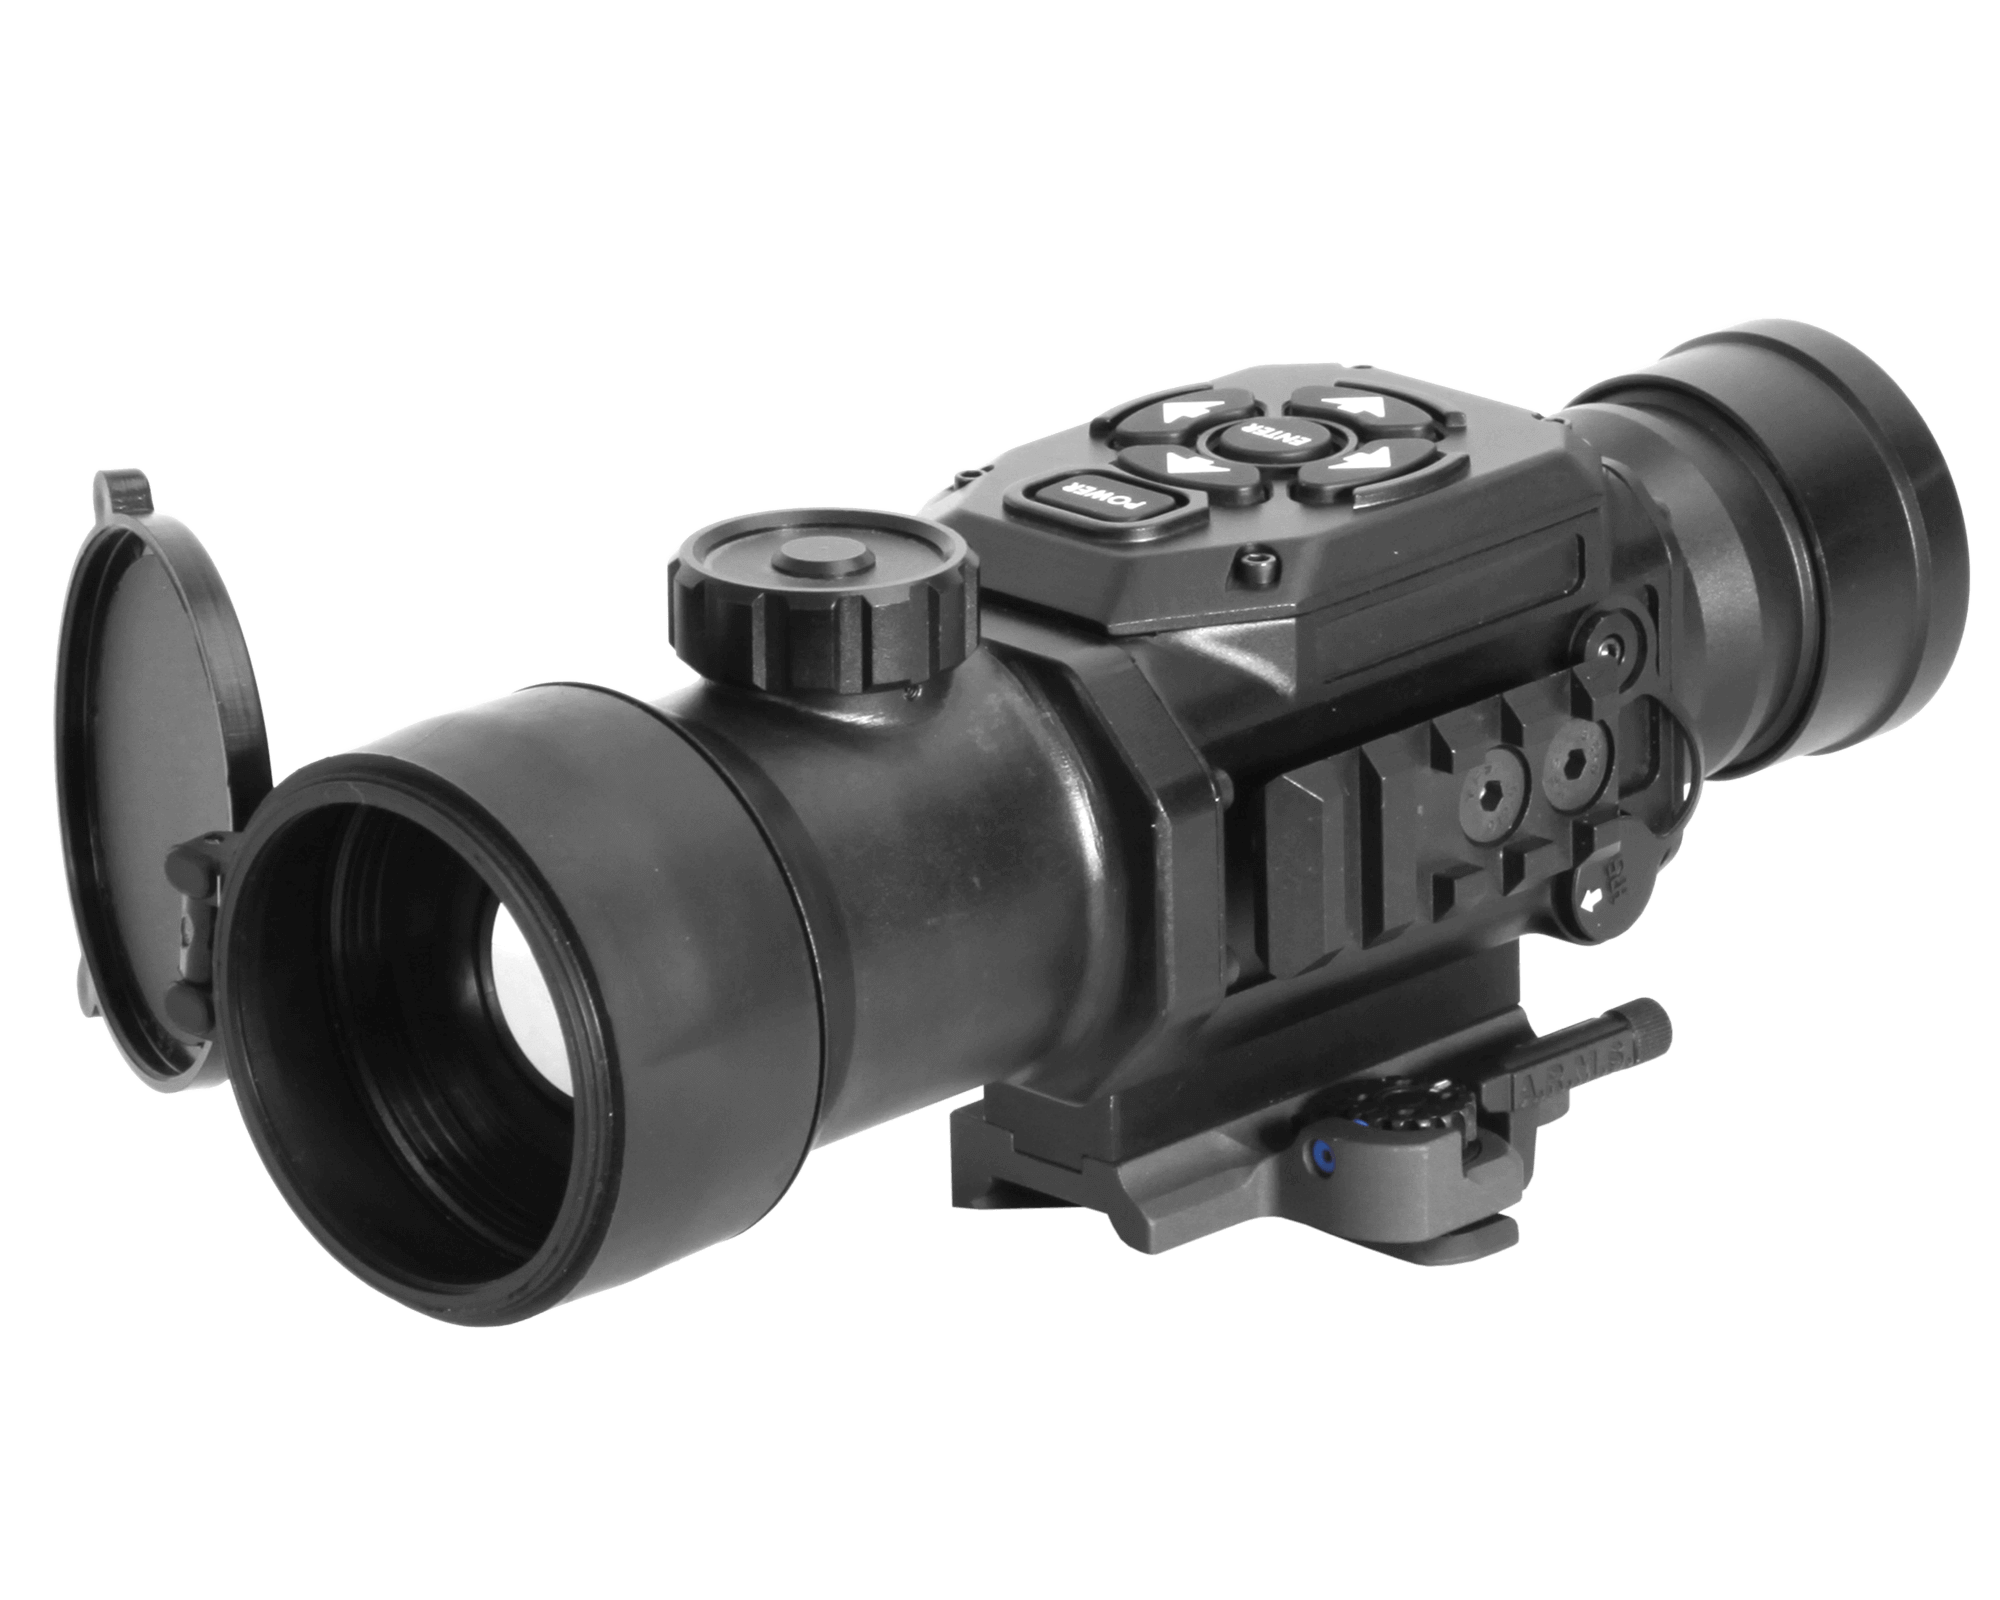 thermal imaging scope adapter for daytime rifle scopes